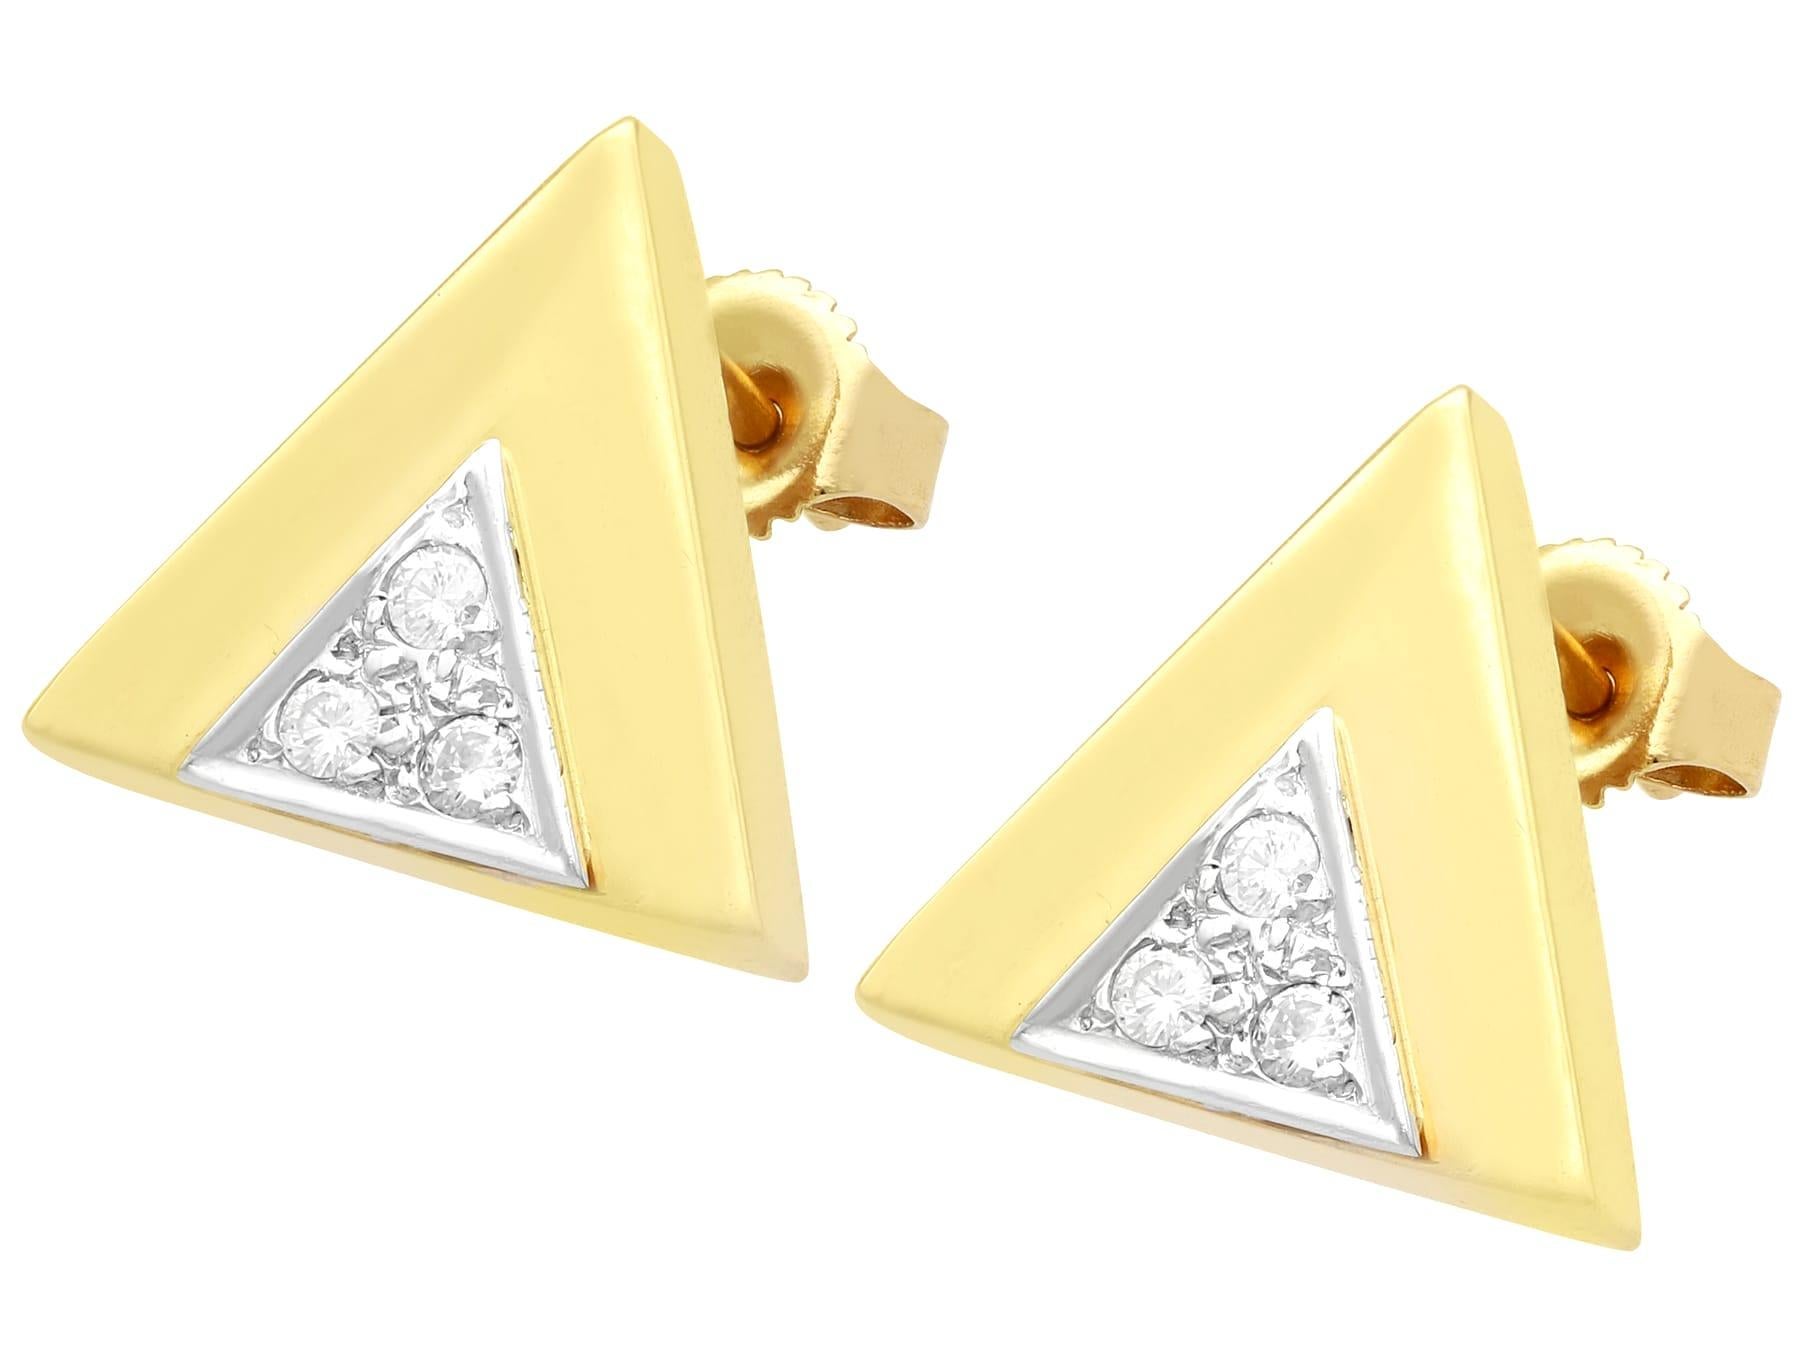 A fine and impressive pair of vintage 0.30 Carat diamond and 14 karat yellow gold, 14 karat white gold set stud earrings; part of our diverse vintage jewelry collections.

These fine and impressive triangular diamond earrings have been crafted in